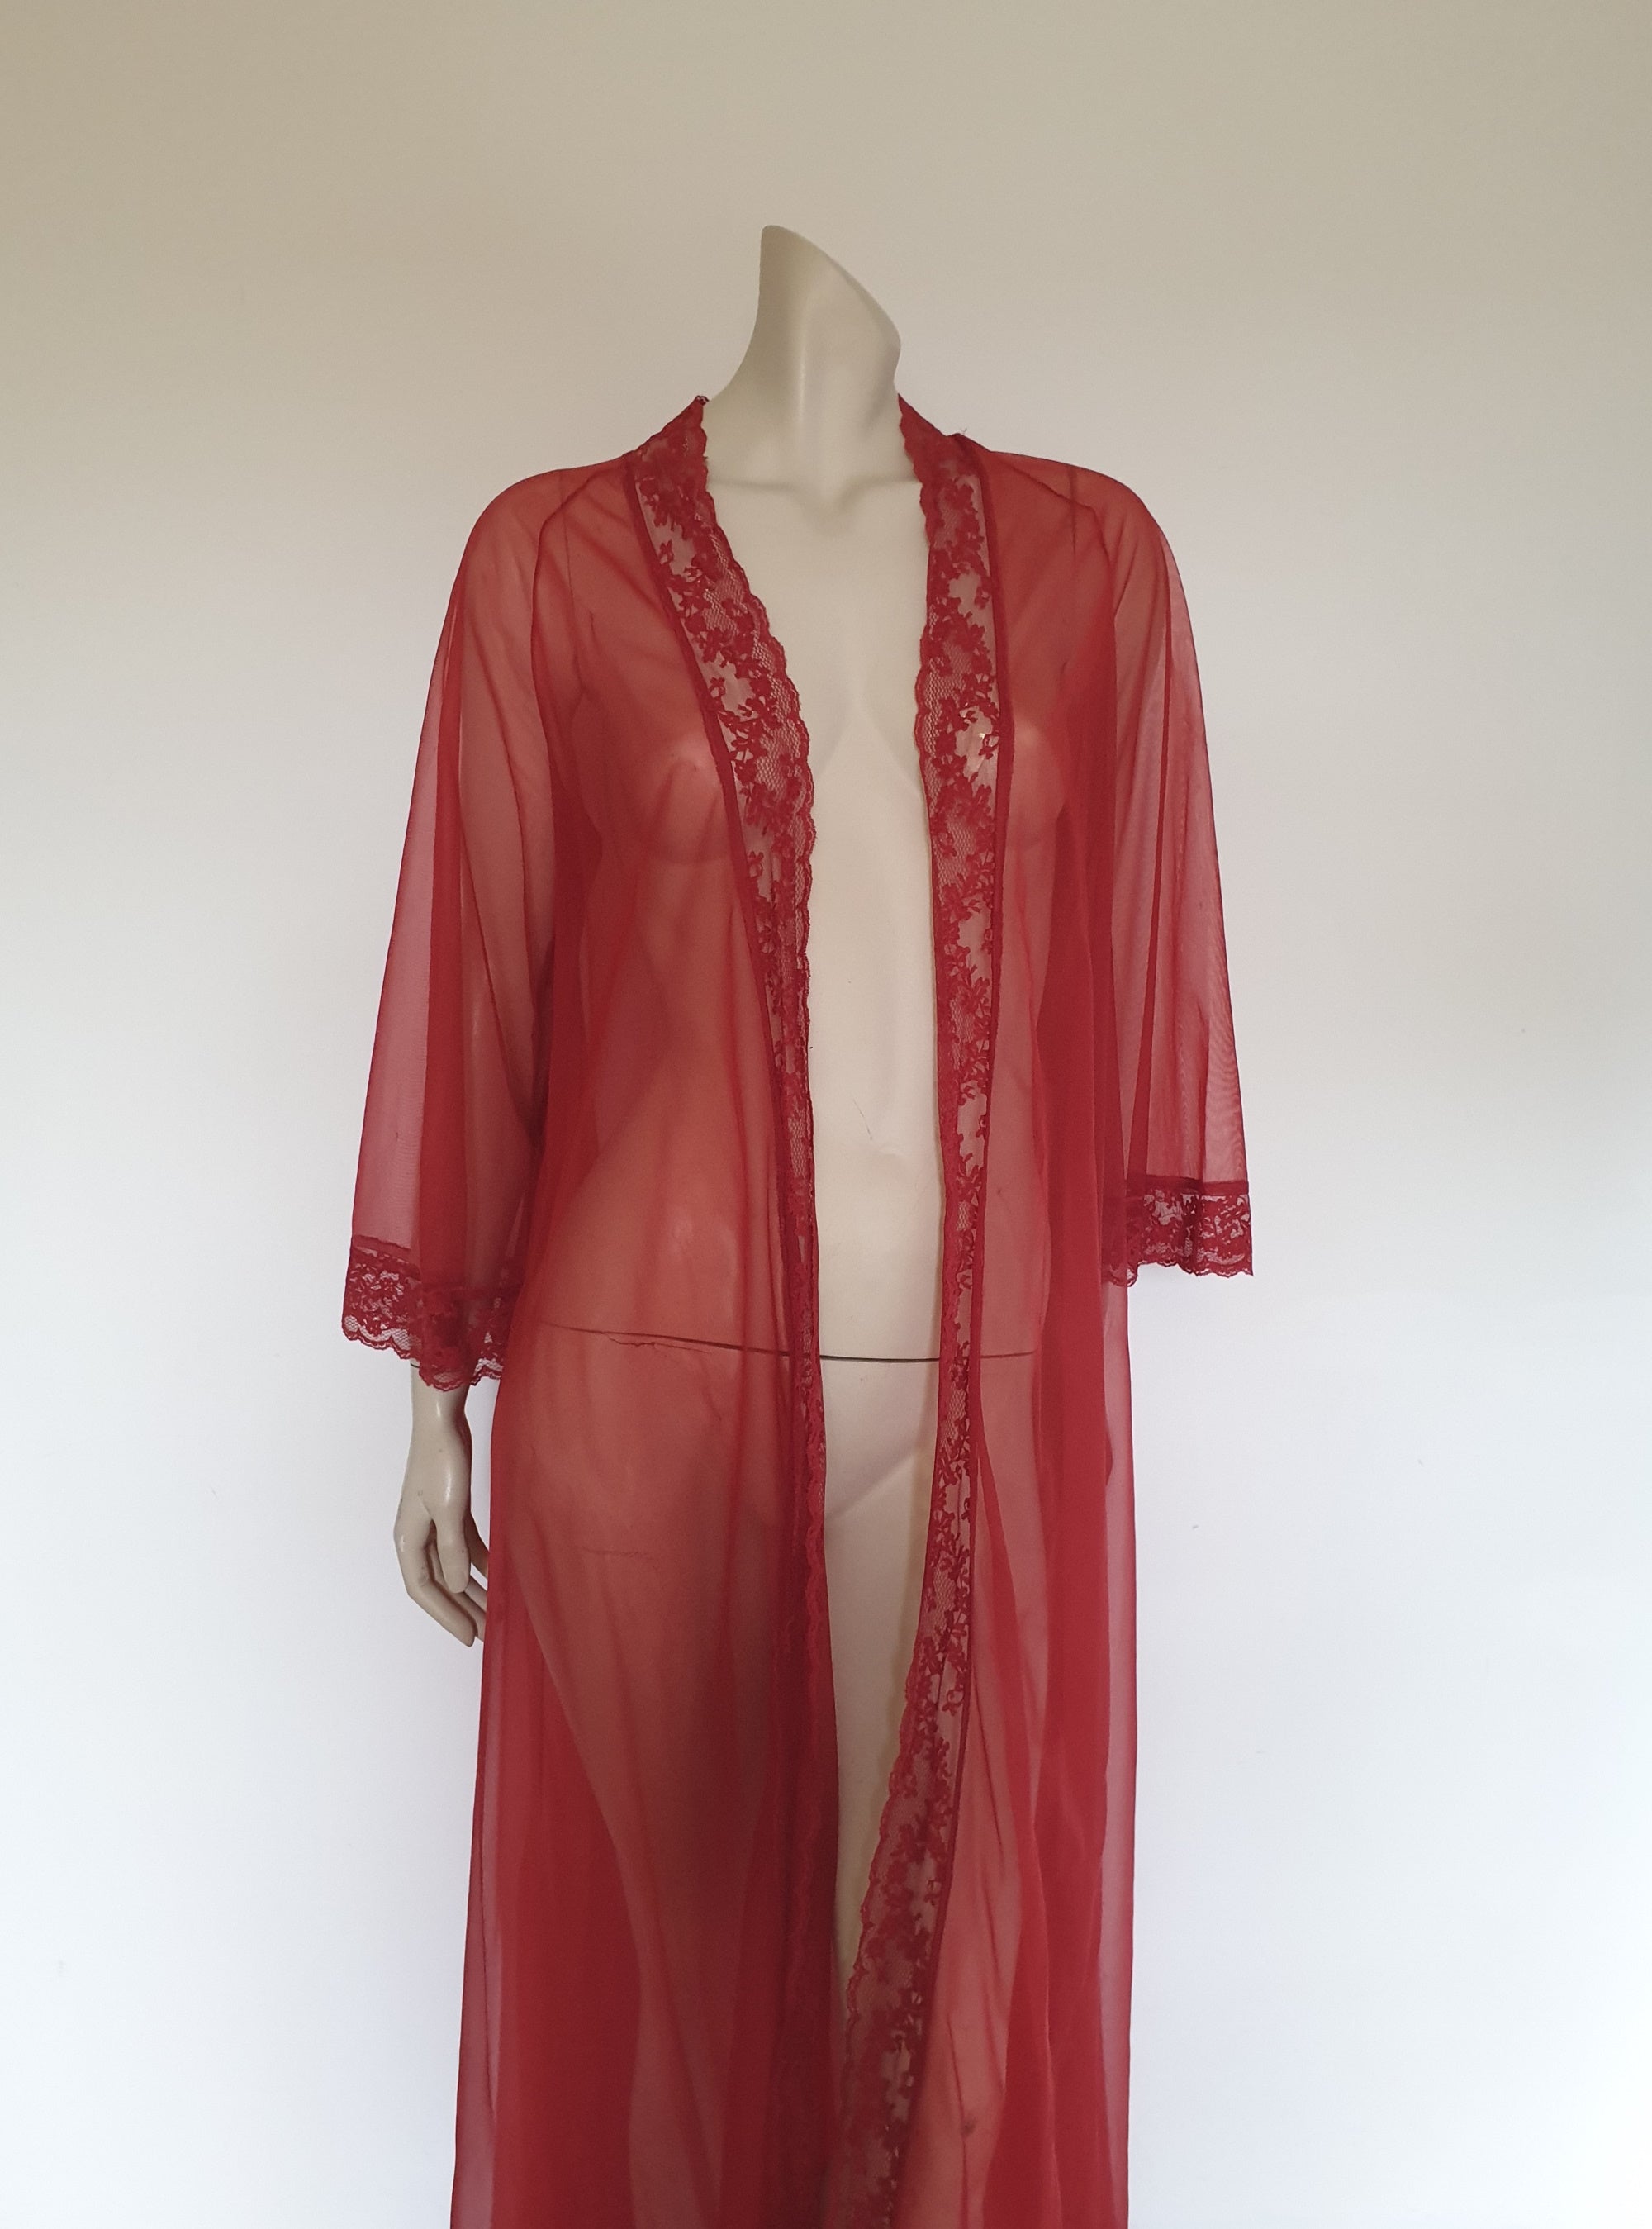 vintage sheer dark red peignoir robe with flared sleeves and wide lace trim